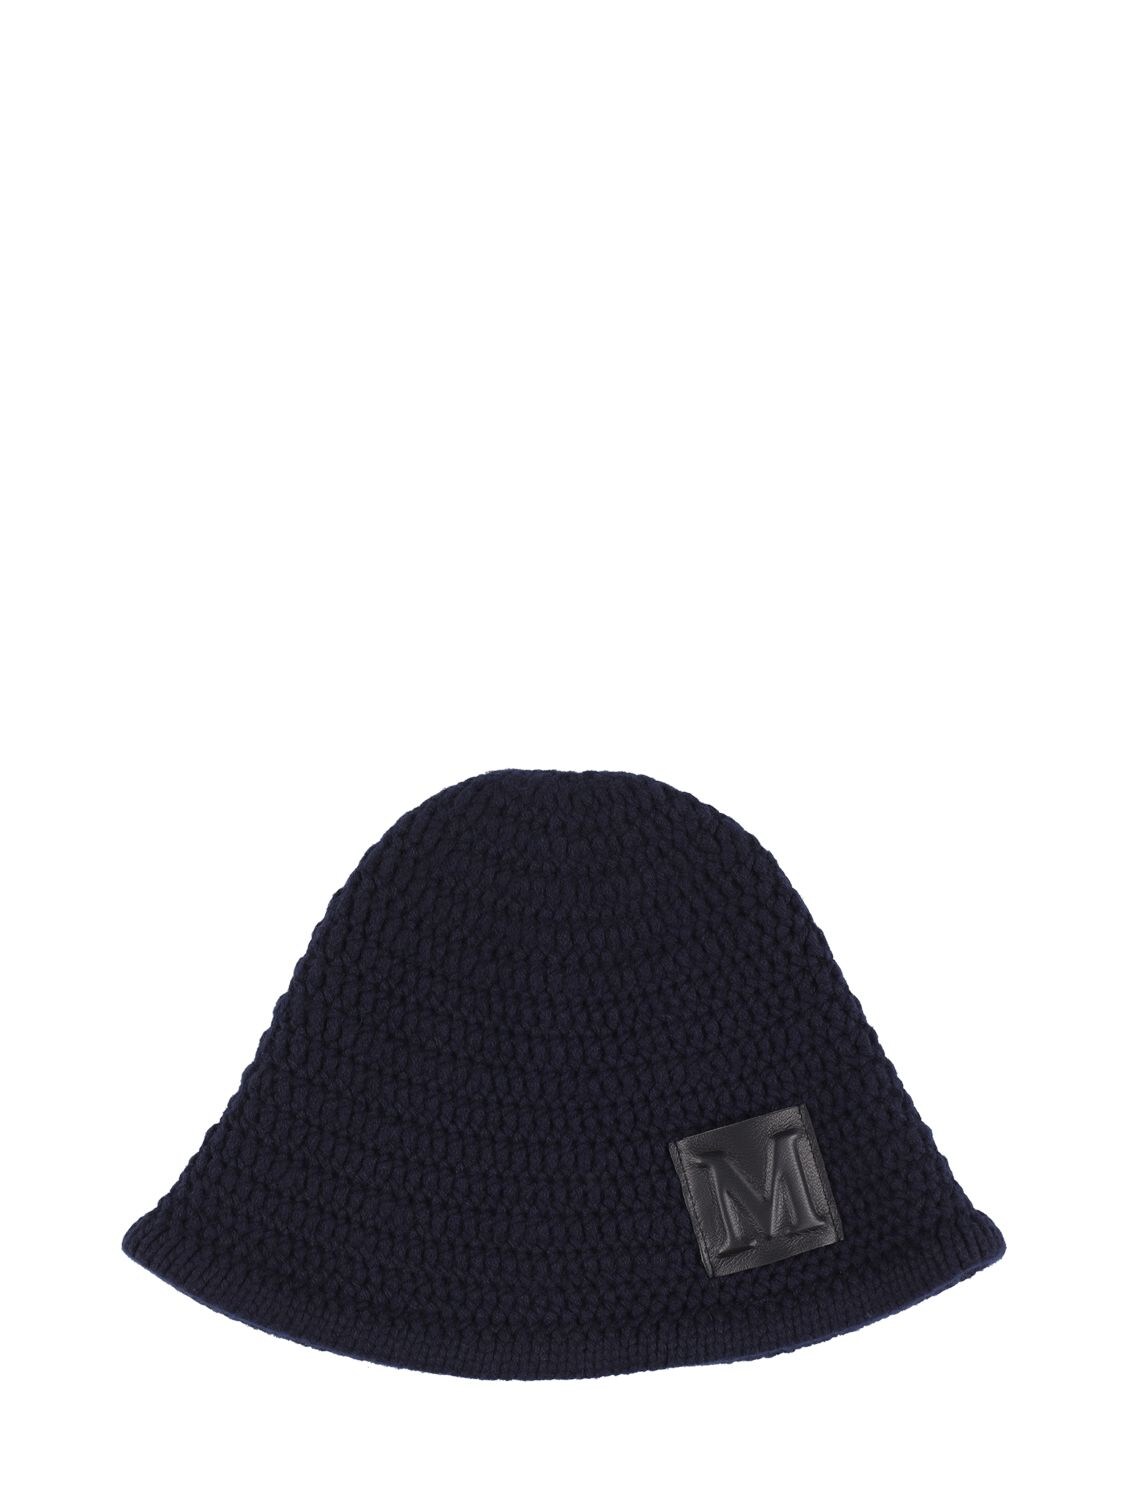 LOUIS VUITTON Cashmere knitted bucket hat Cashmere / Leather Navy x Black